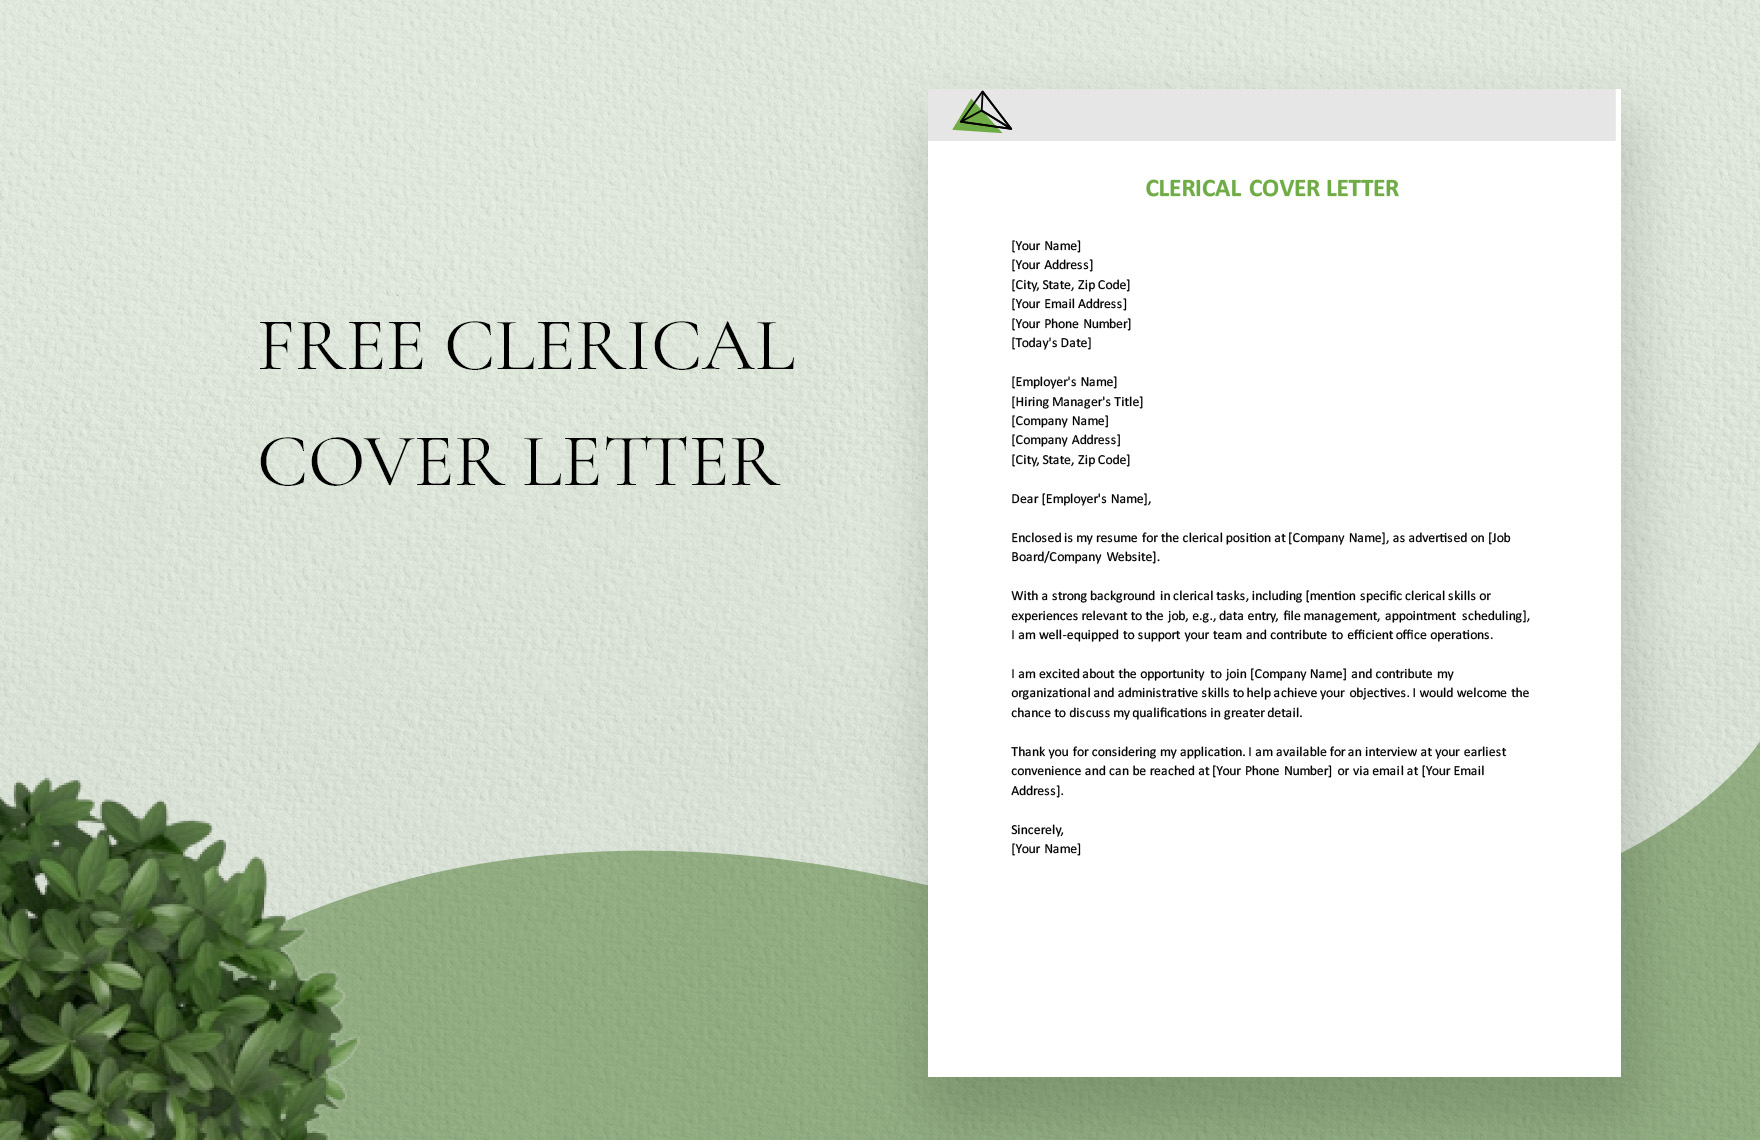 Clerical Cover Letter